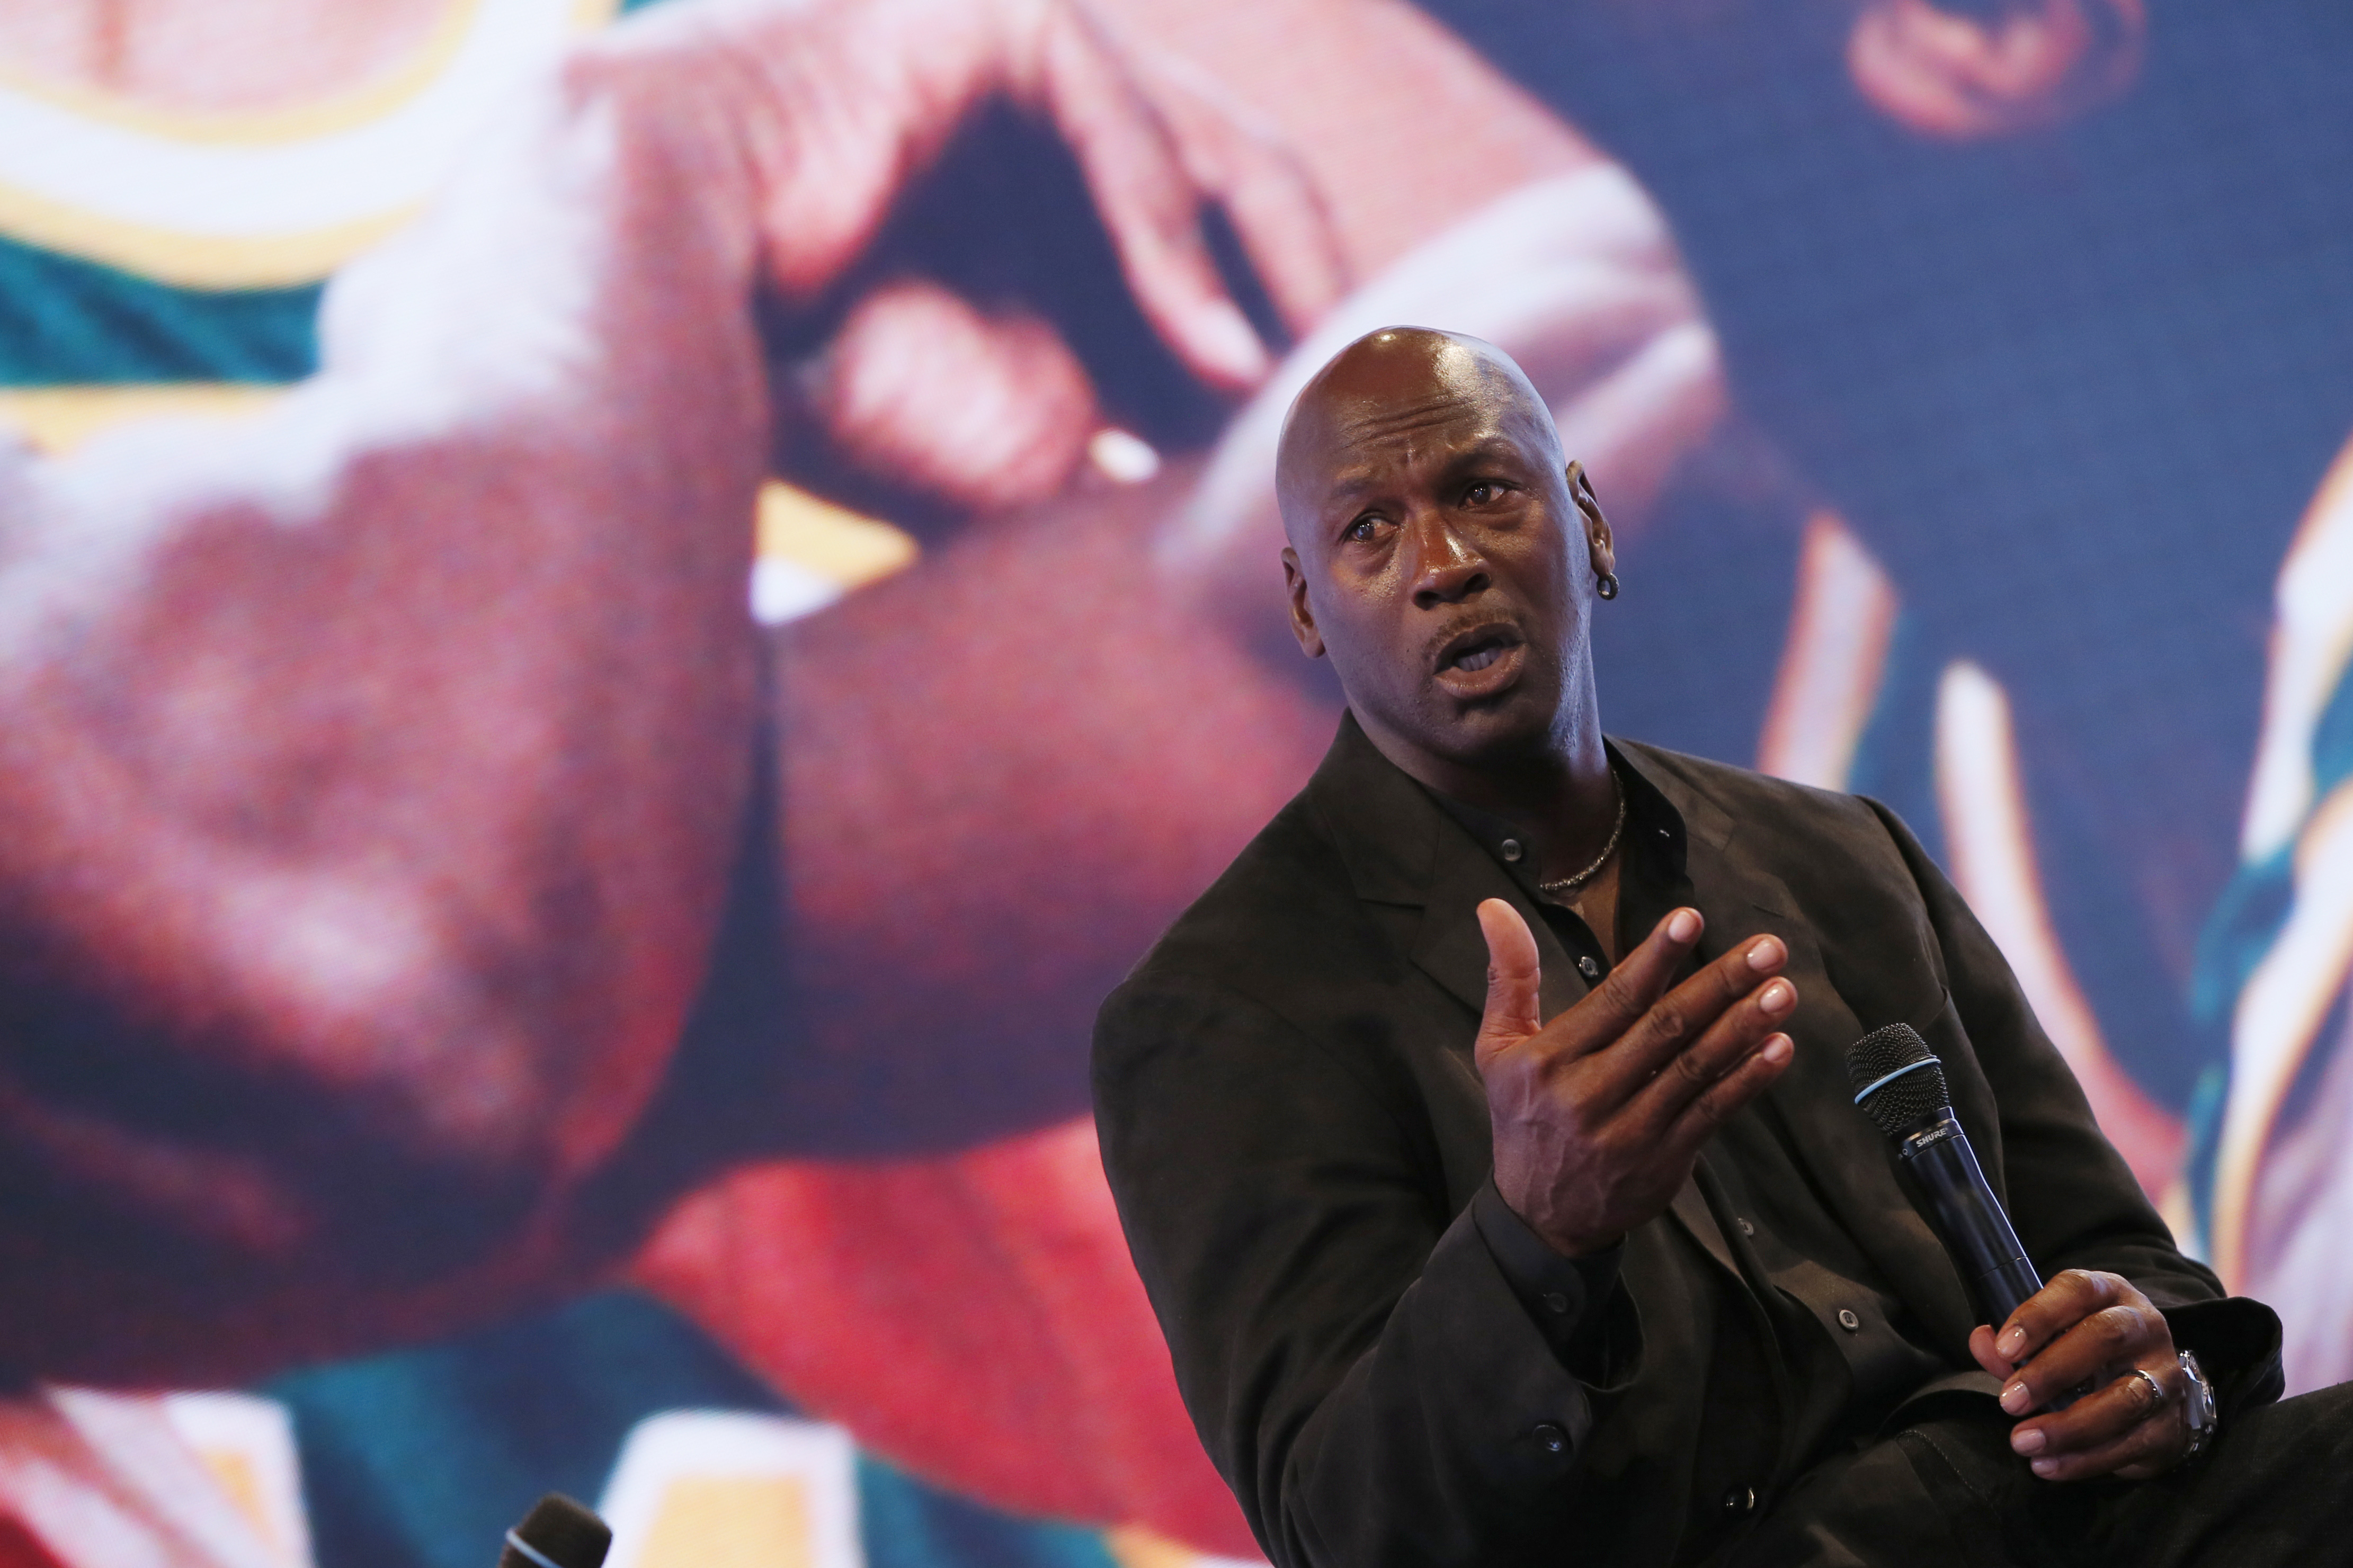 Former basketball great Michael Jordan delivers a speech as he attends a party celebrating the 30th anniversary of the Air Jordan shoe line in Paris